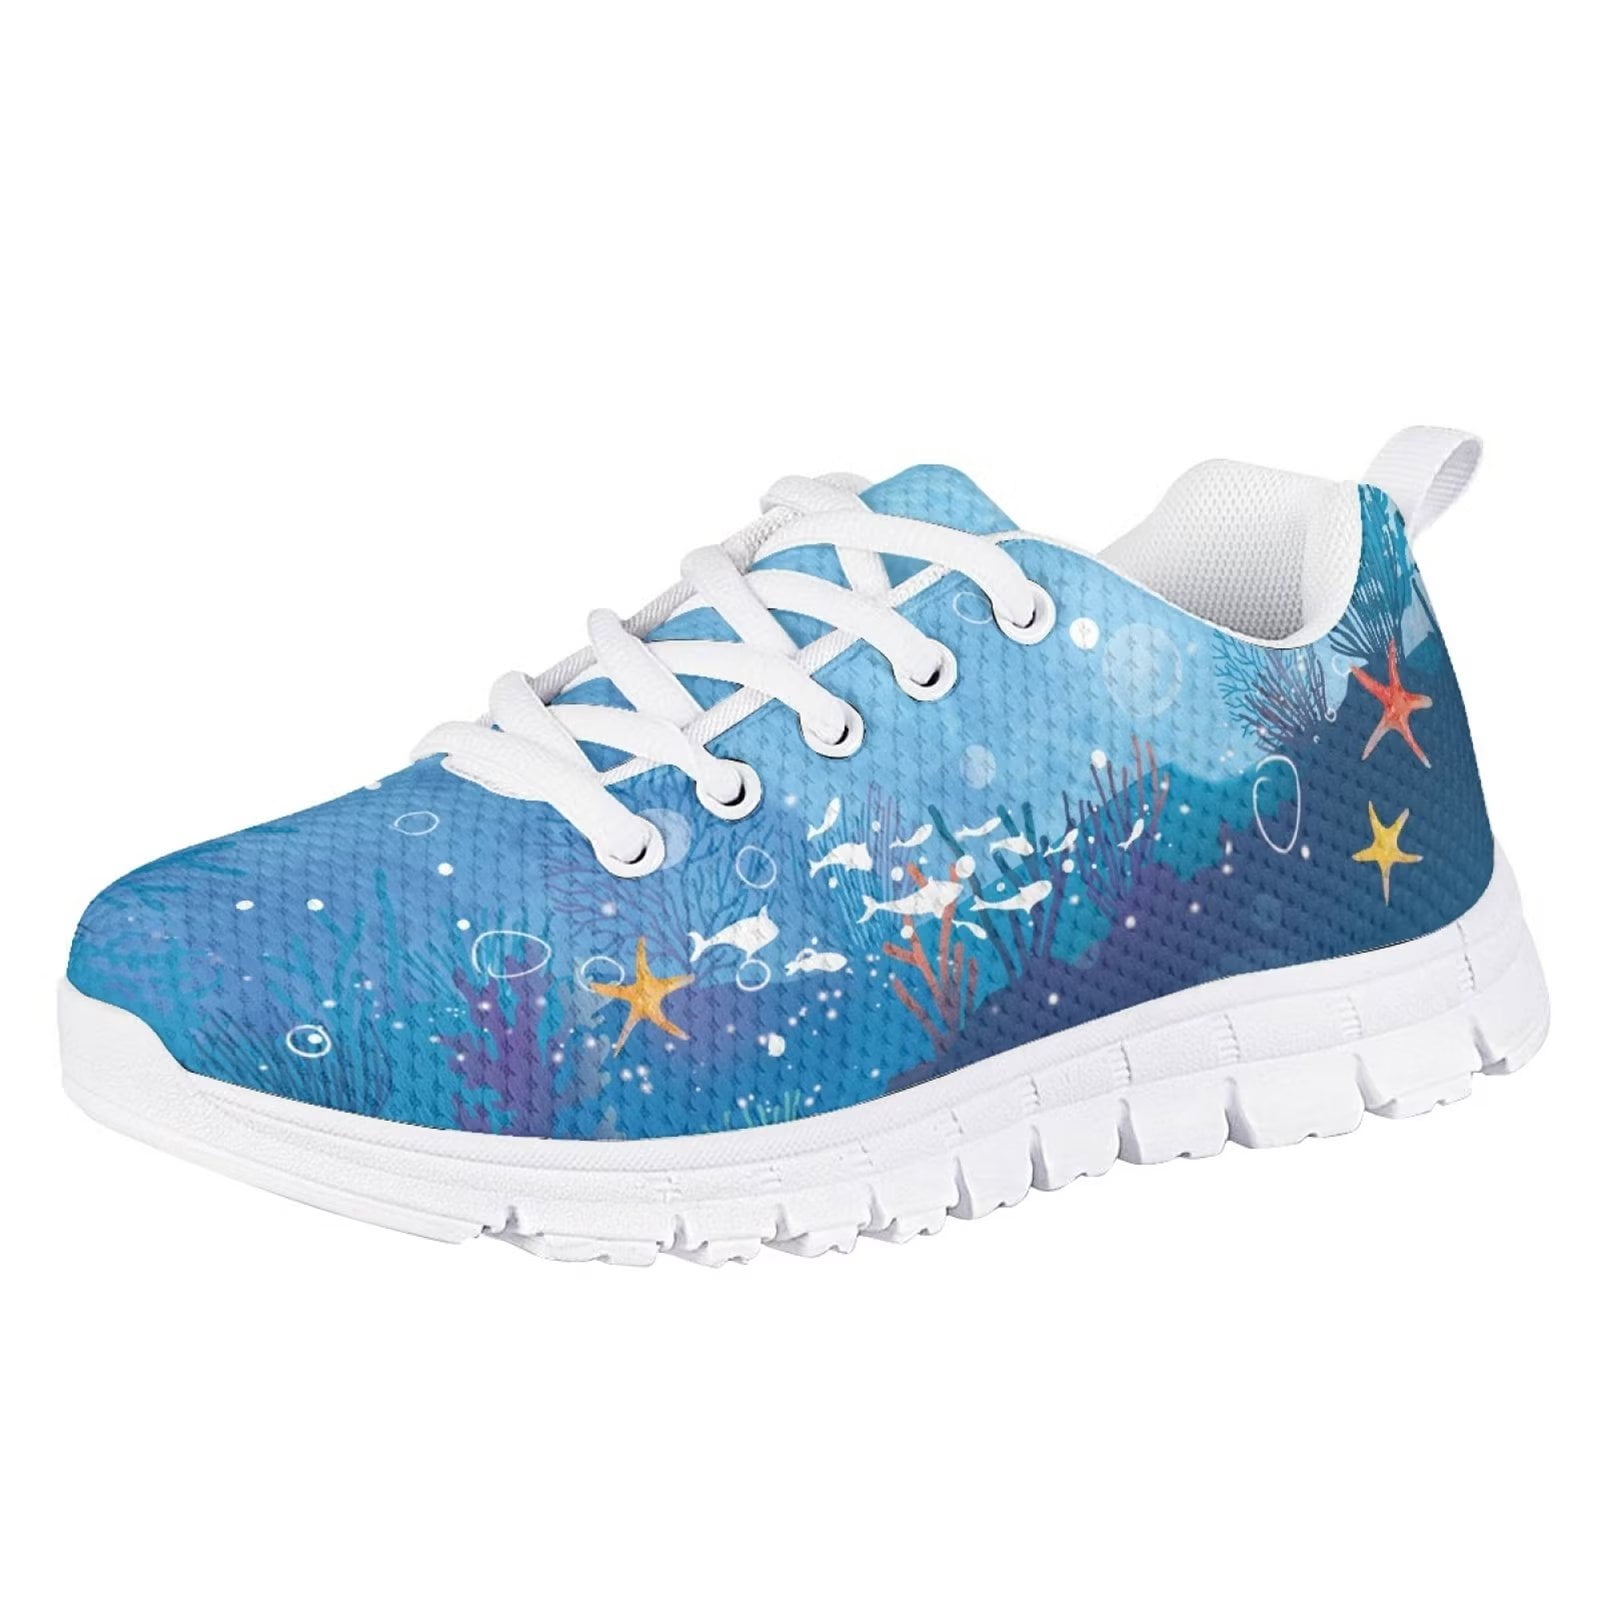 Pzuqiu Starfish Girls Blue Ocean Sneakers Size 11 Lightweight Running  Tennis Shoes Comfy Athletic Walking Shoes Outdoor Sport Shoes 